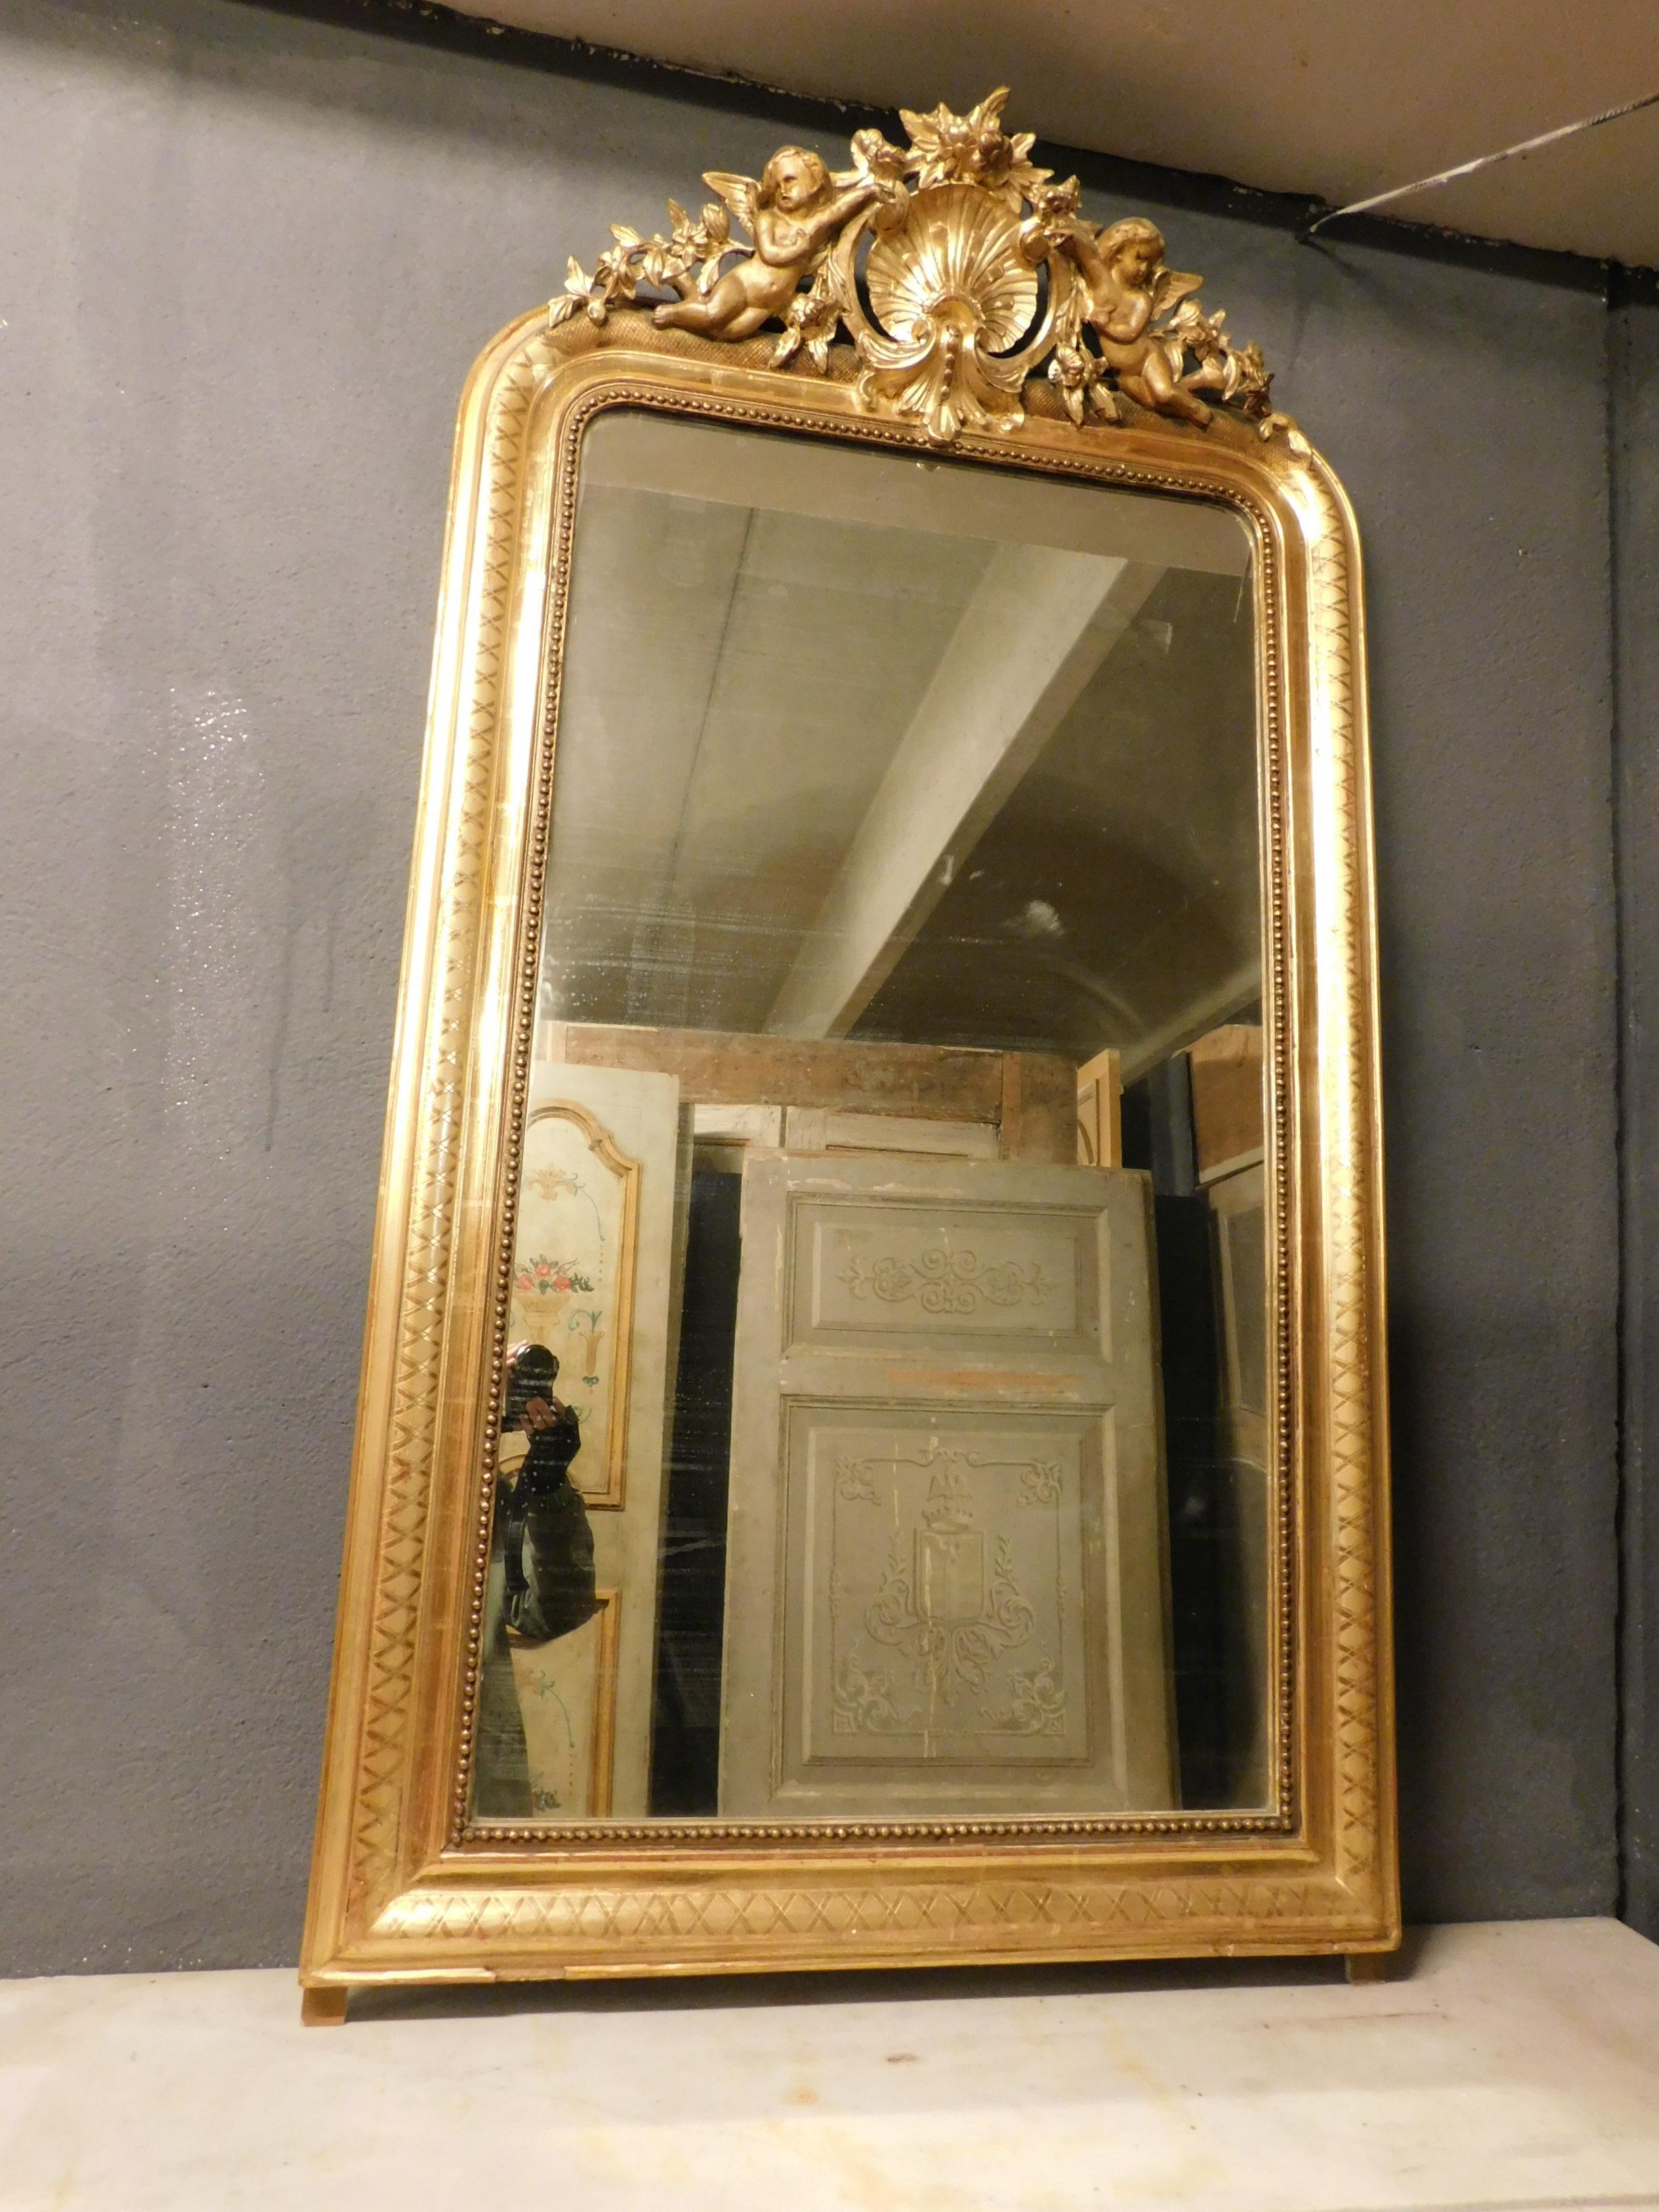 Ancient gilded wooden mirror with cherubs and hand carved shell, gilded with precious leaf, with engravings on the frame and richly carved molding.
From the 19th century, built in Italy, measuring 86 x 86 cm (including 4 cm wooden feet), maximum